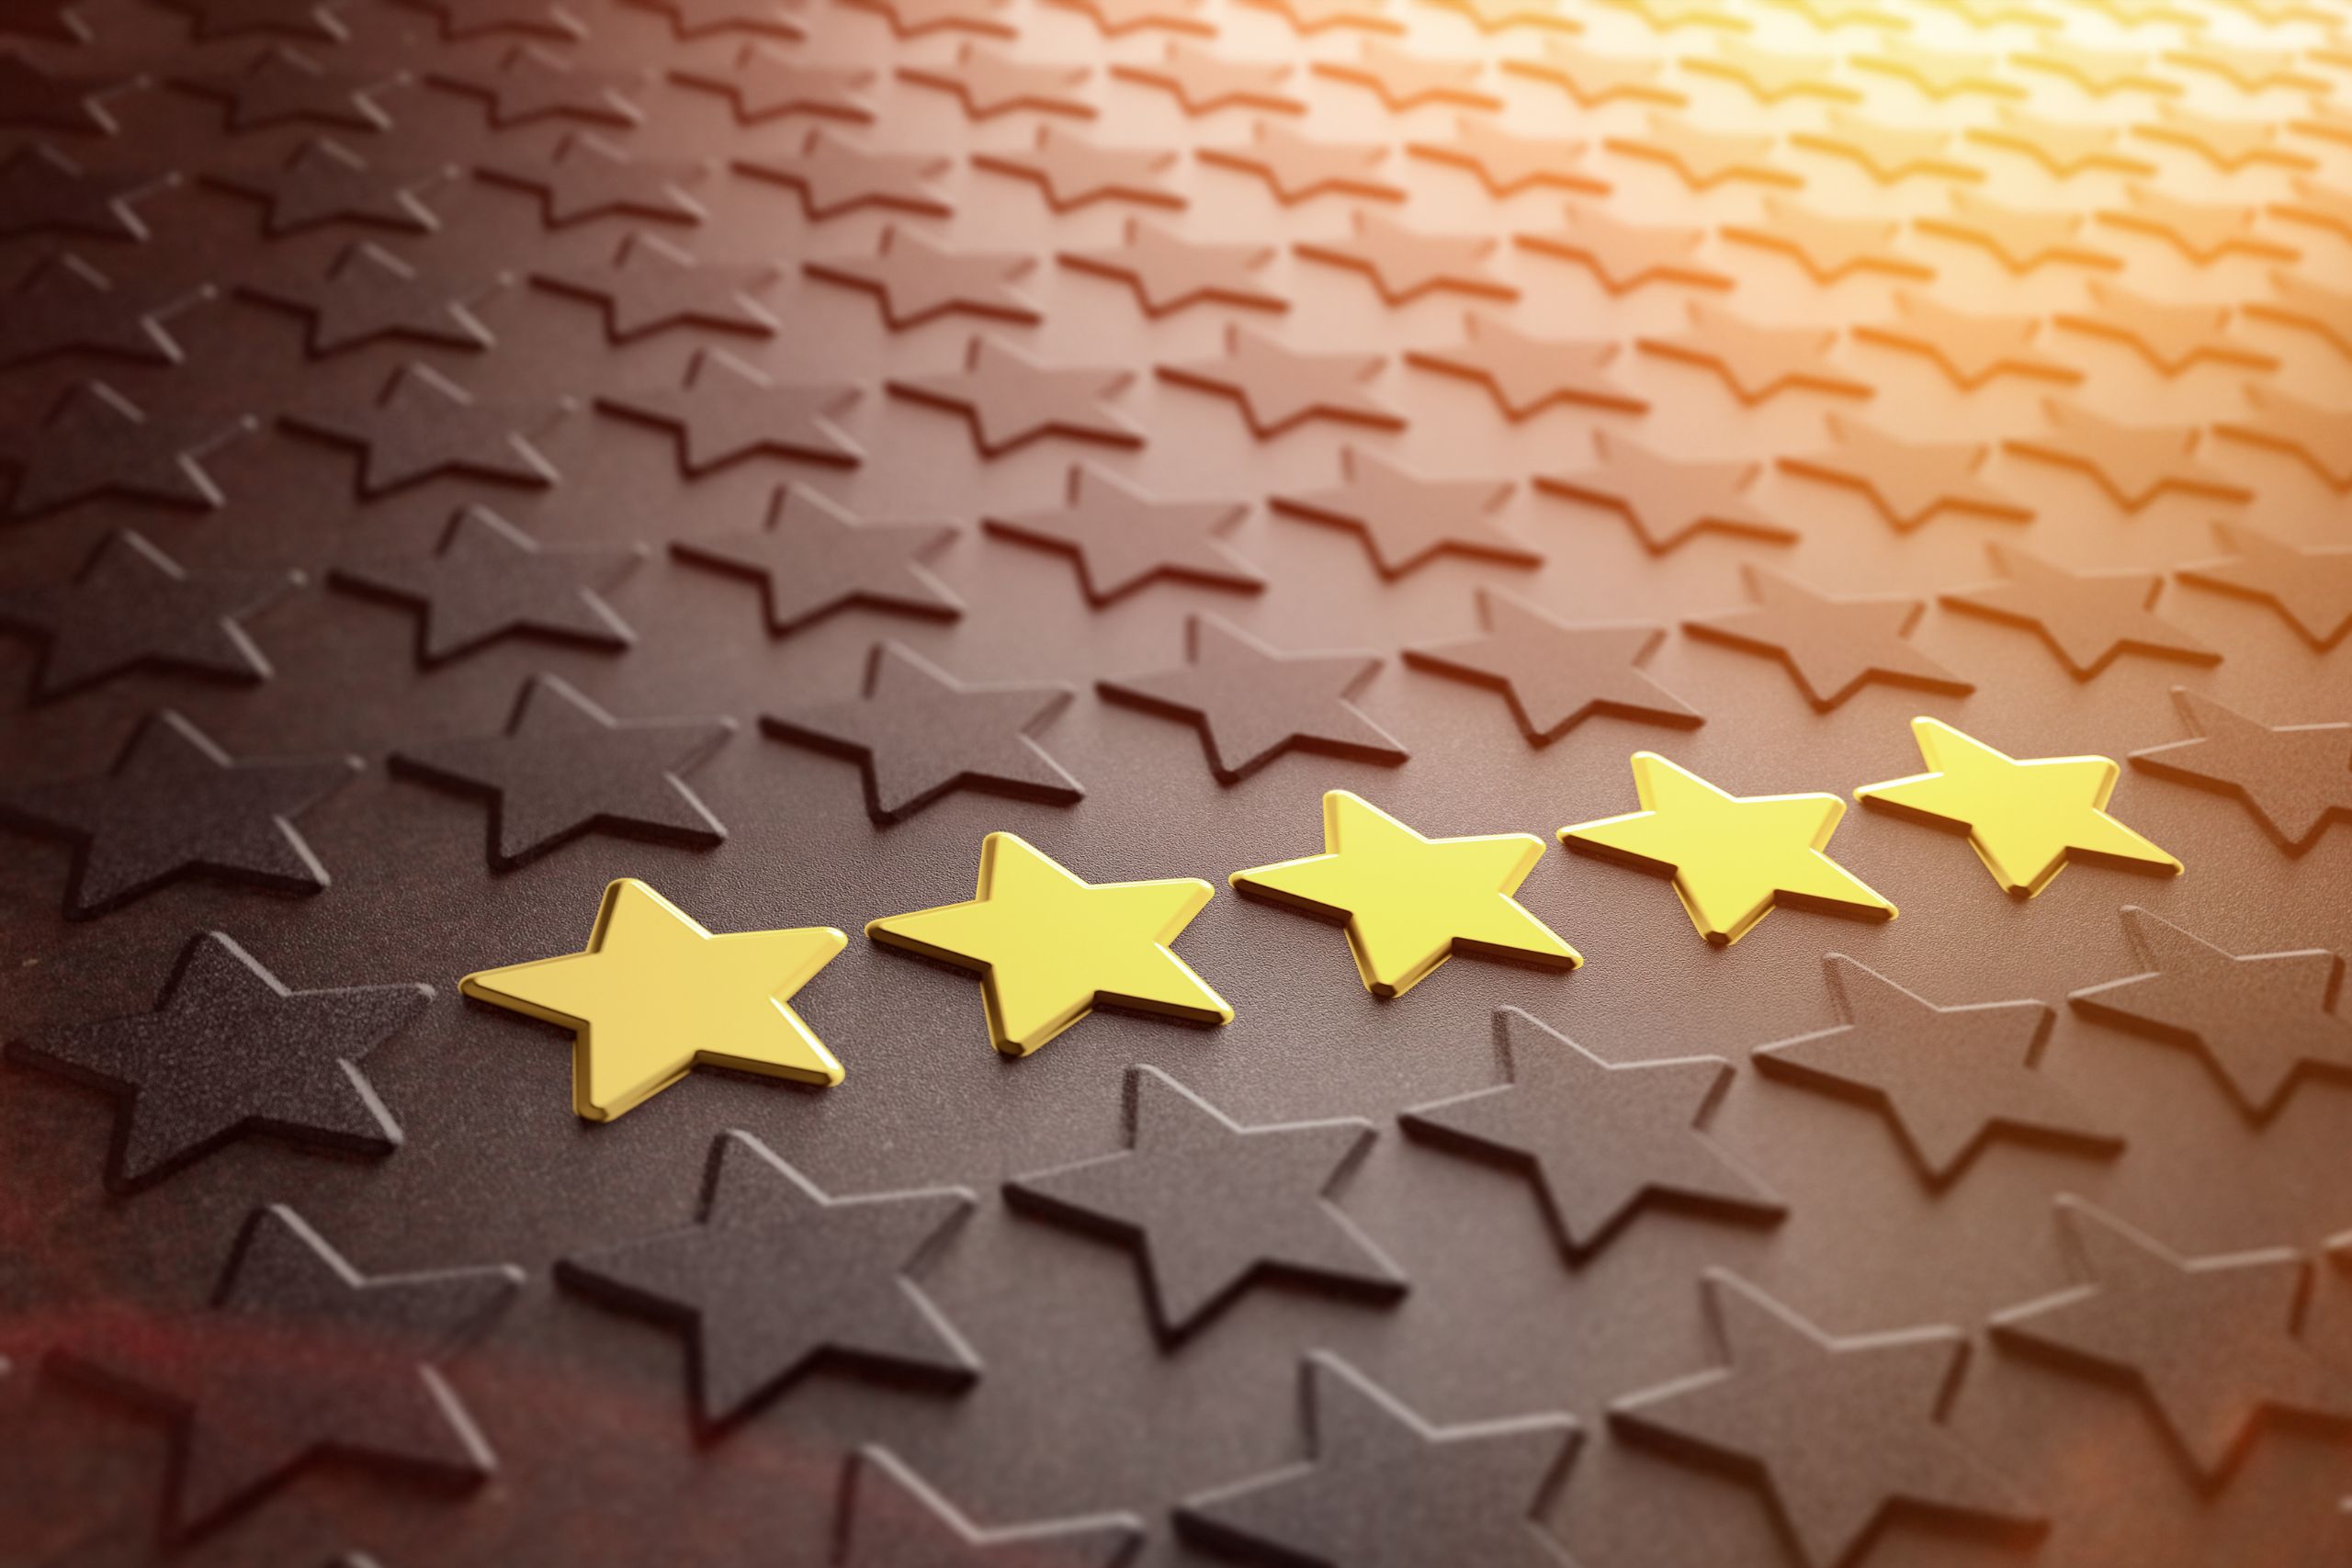 5 stars representing the security score on a vendor risk assesment